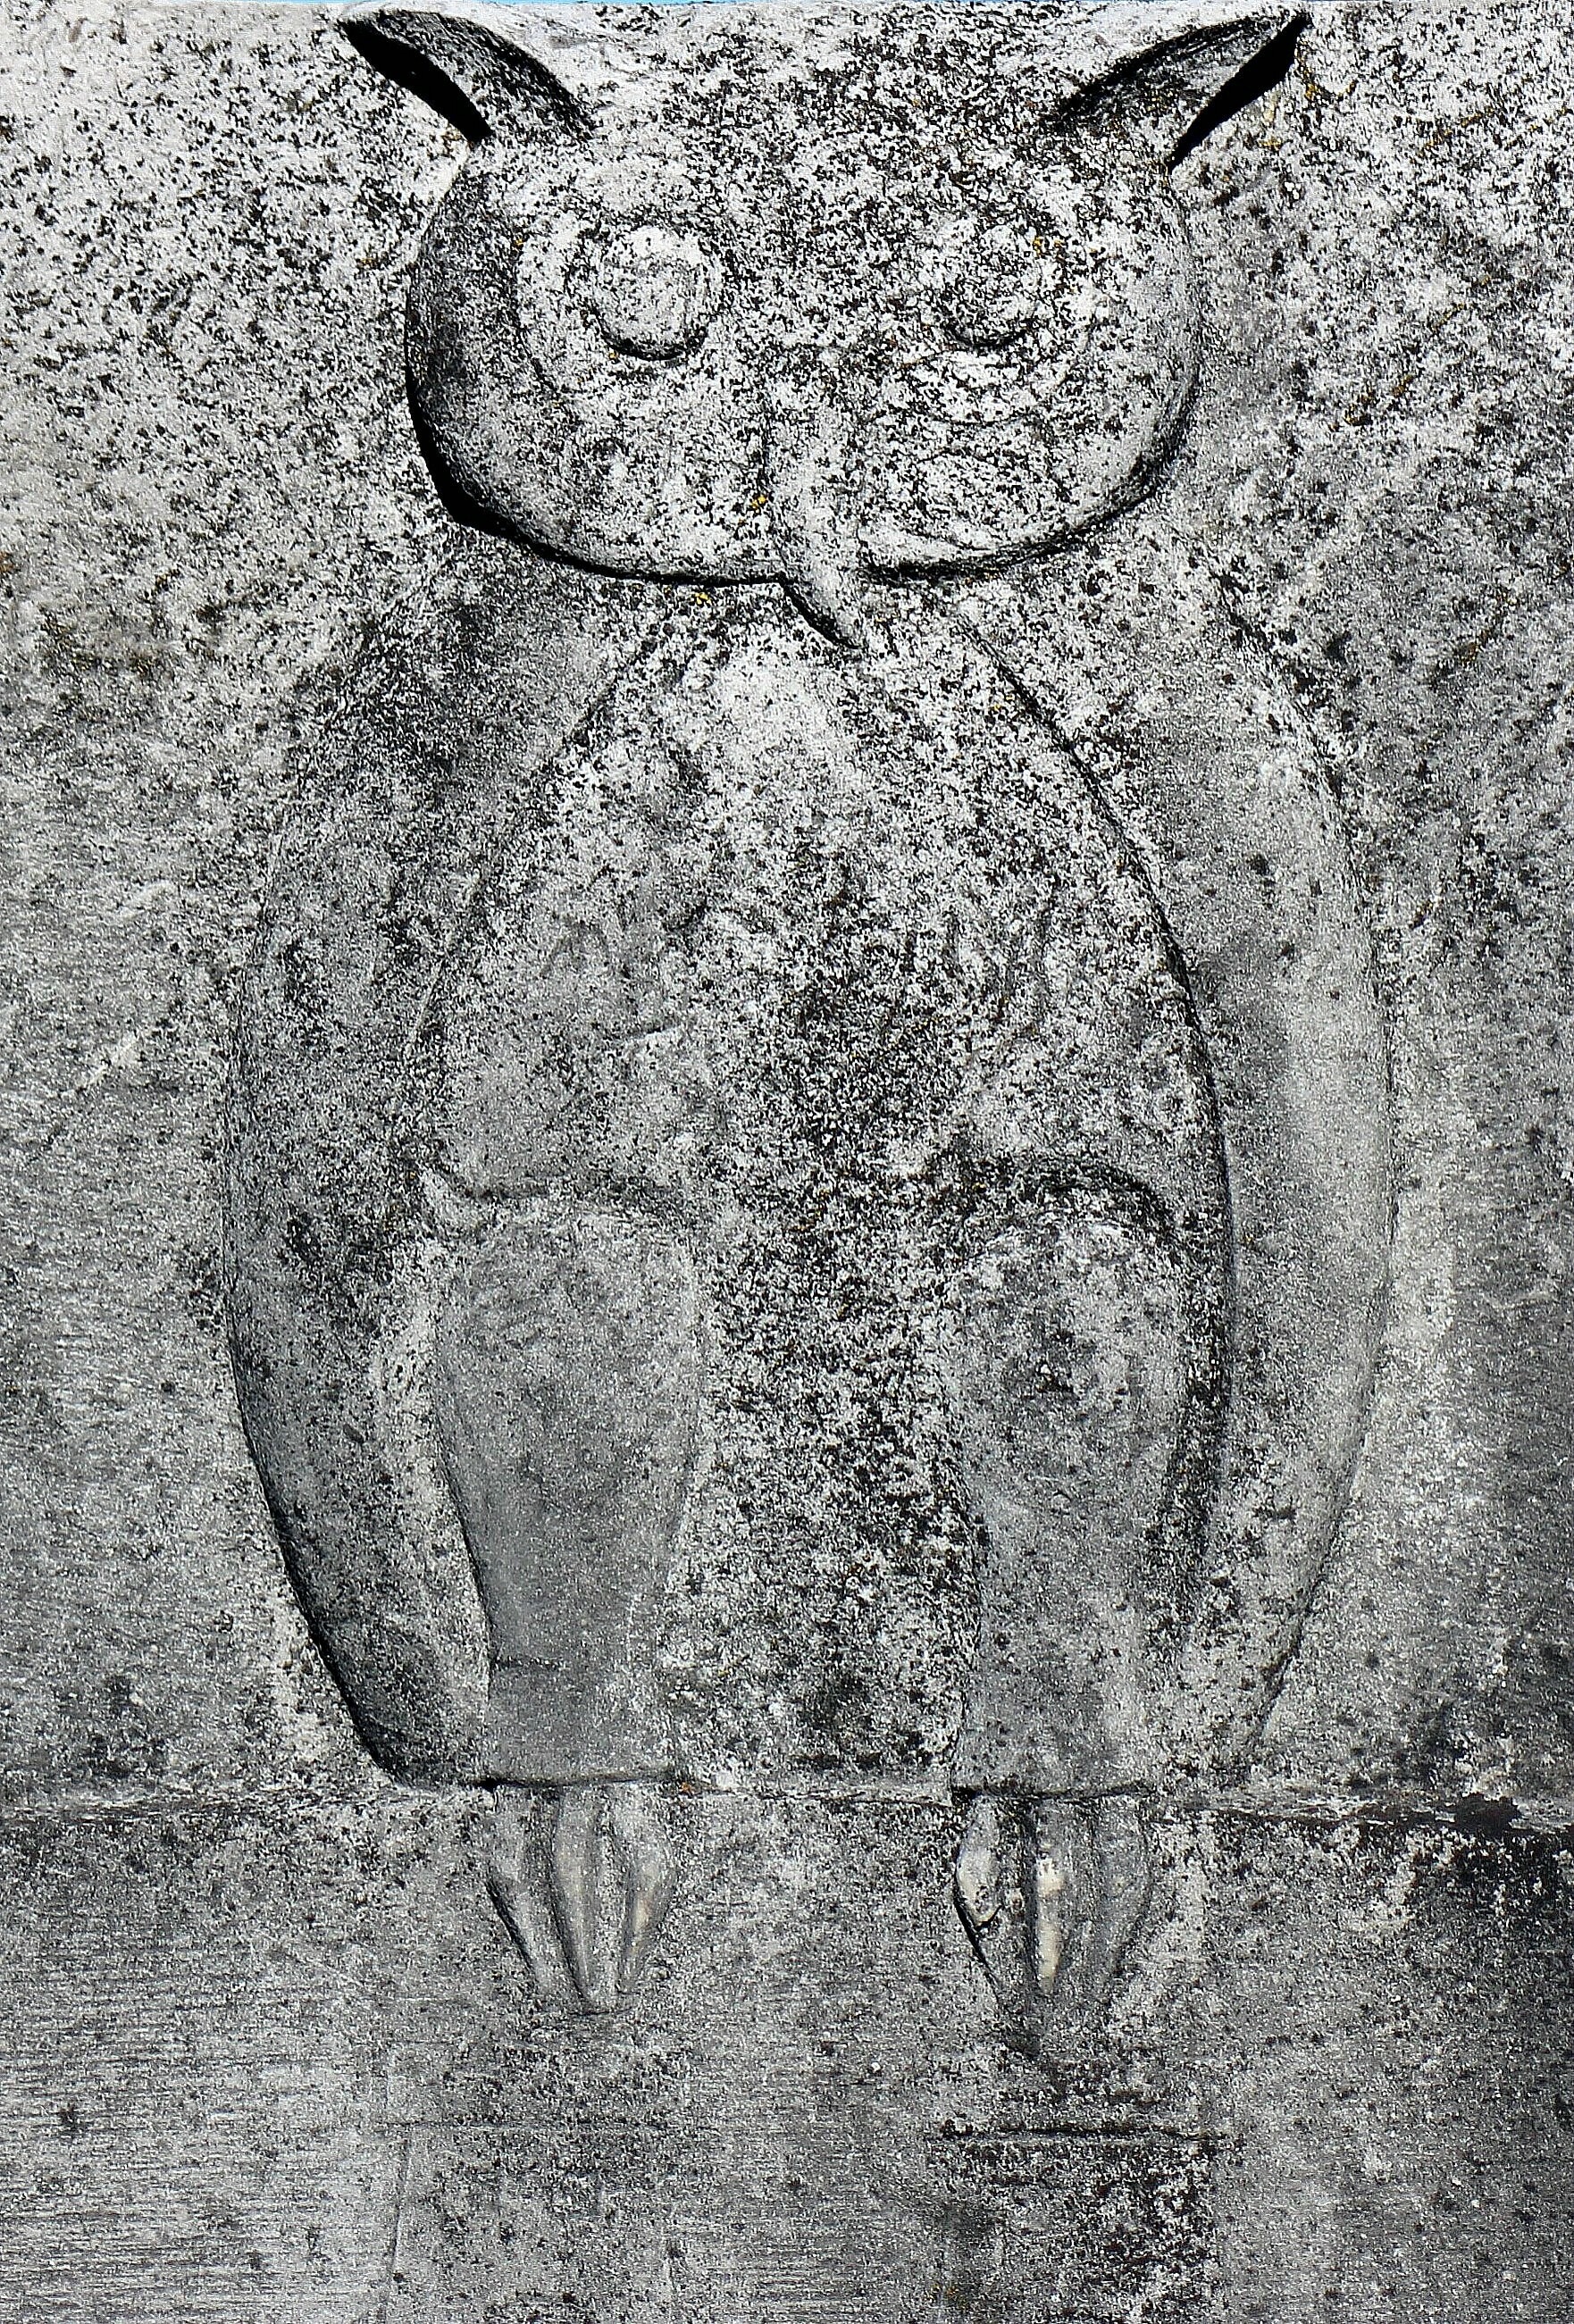 gray stone with embedded owl